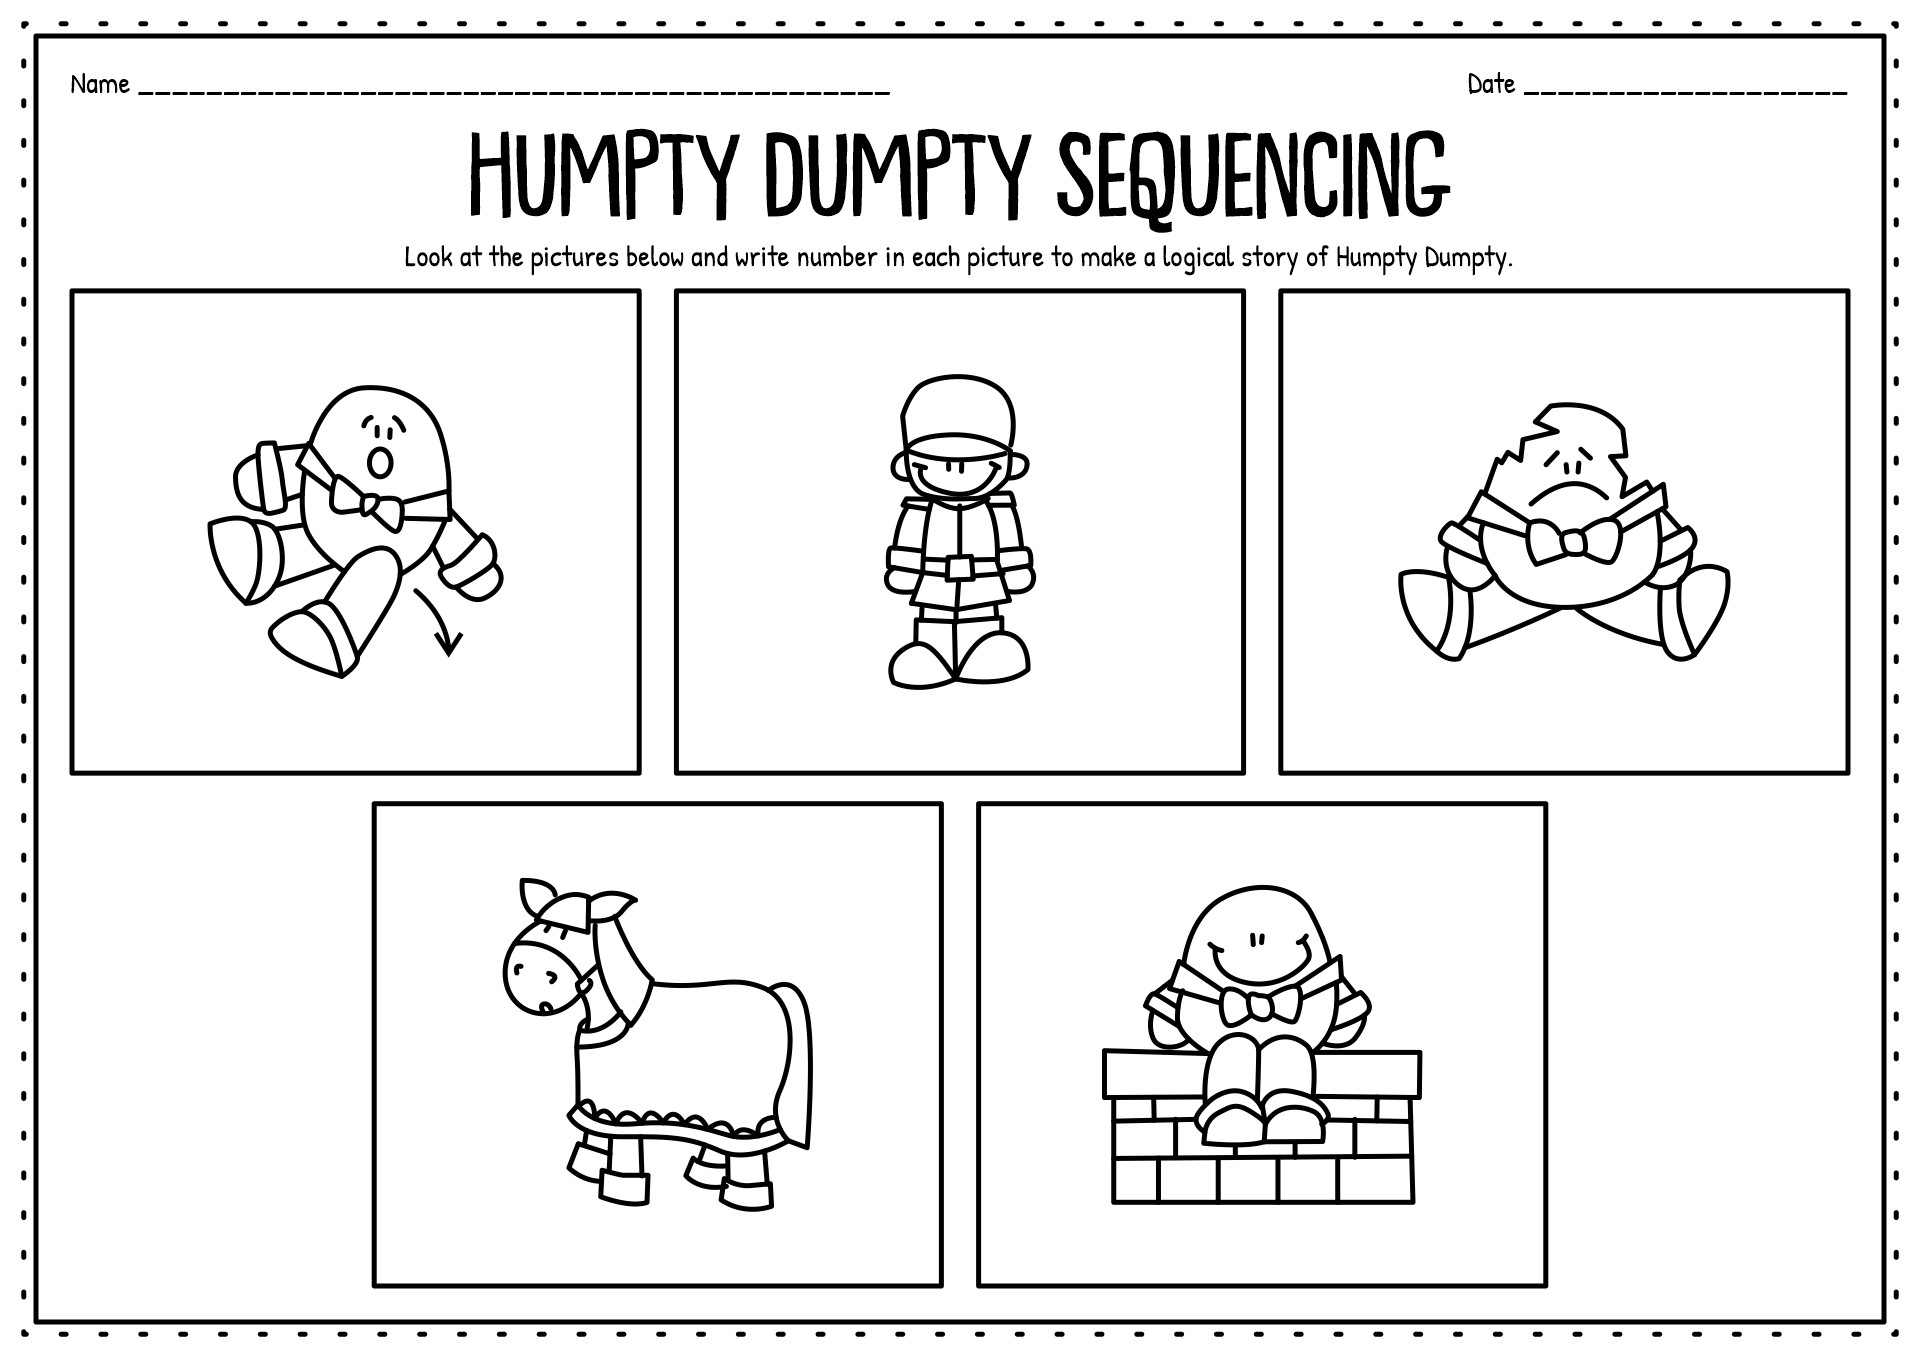 17 Best Images of Story Sequence Of Events Worksheets - Story